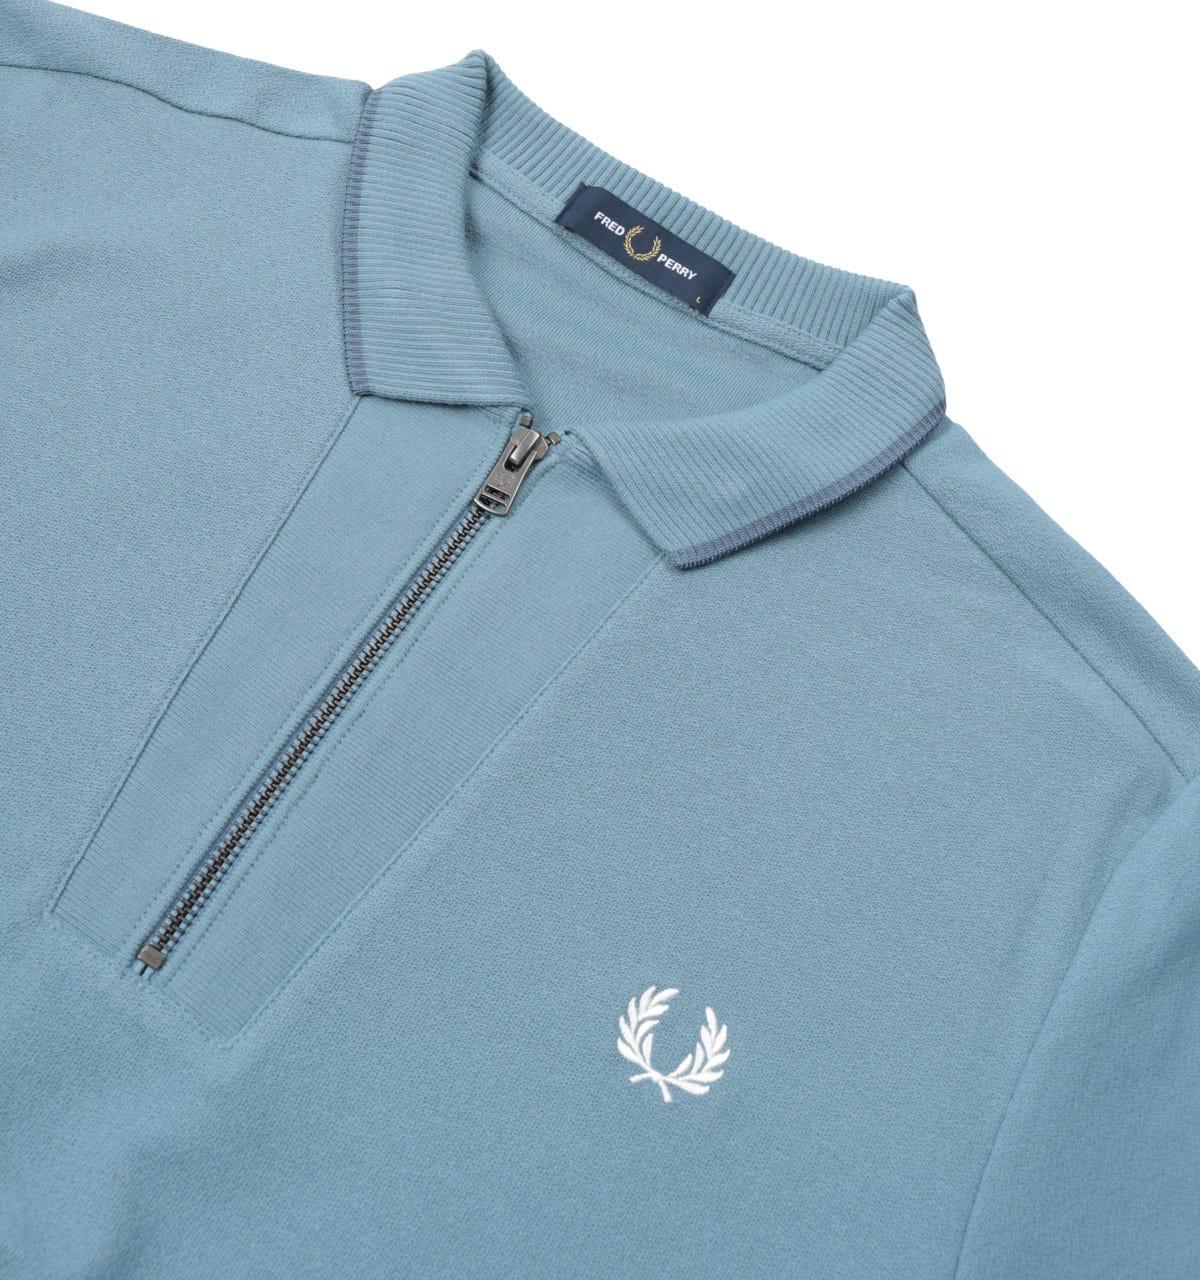 Fred Perry Cotton Rib Detail Neck Polo Shirt in Blue for Men - Save 21% |  Lyst